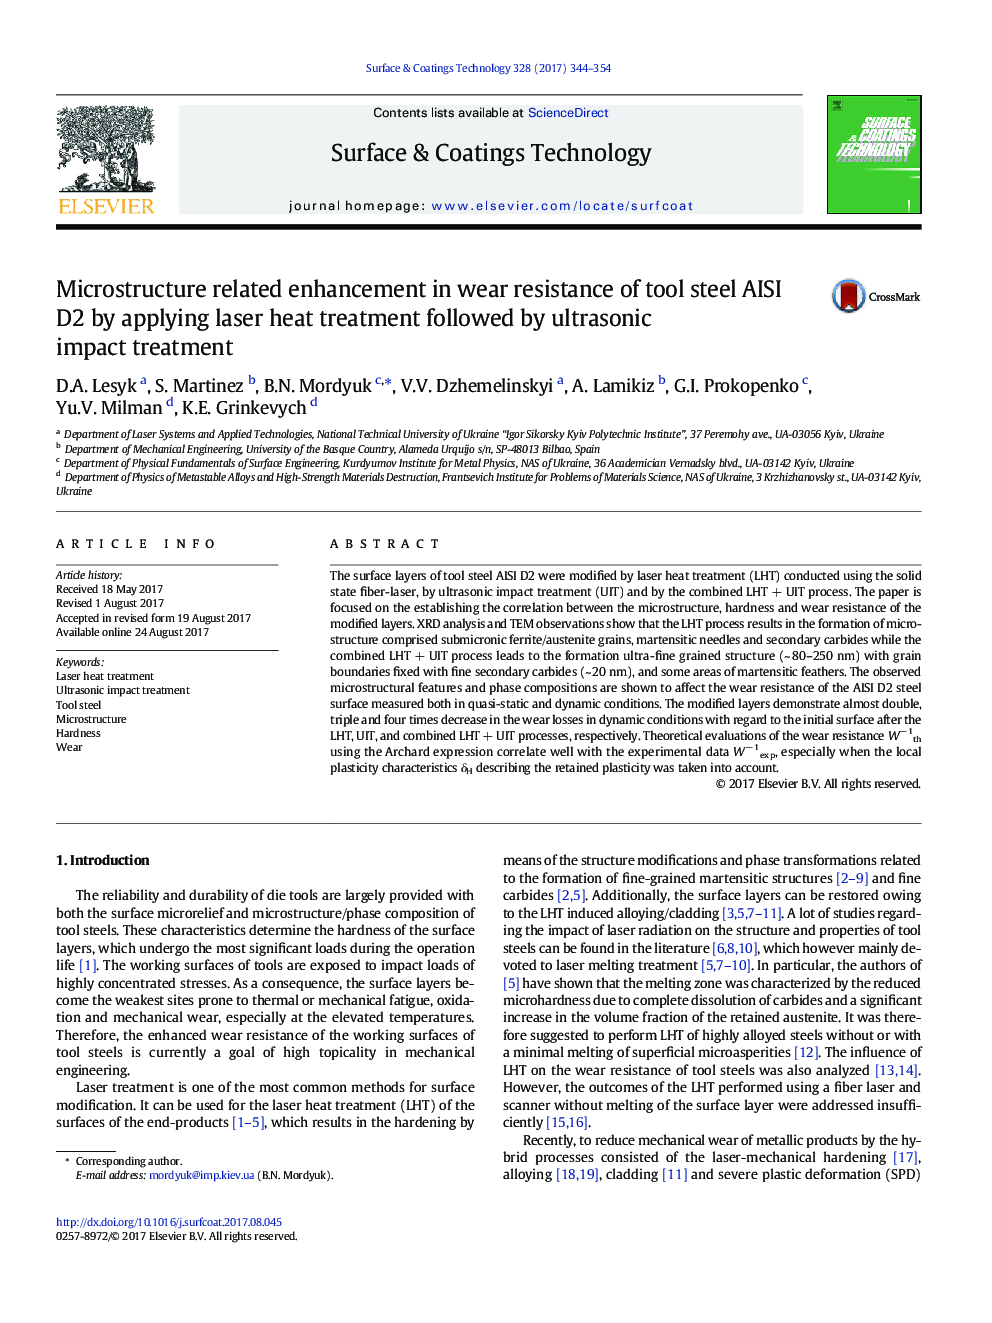 Microstructure related enhancement in wear resistance of tool steel AISI D2 by applying laser heat treatment followed by ultrasonic impact treatment